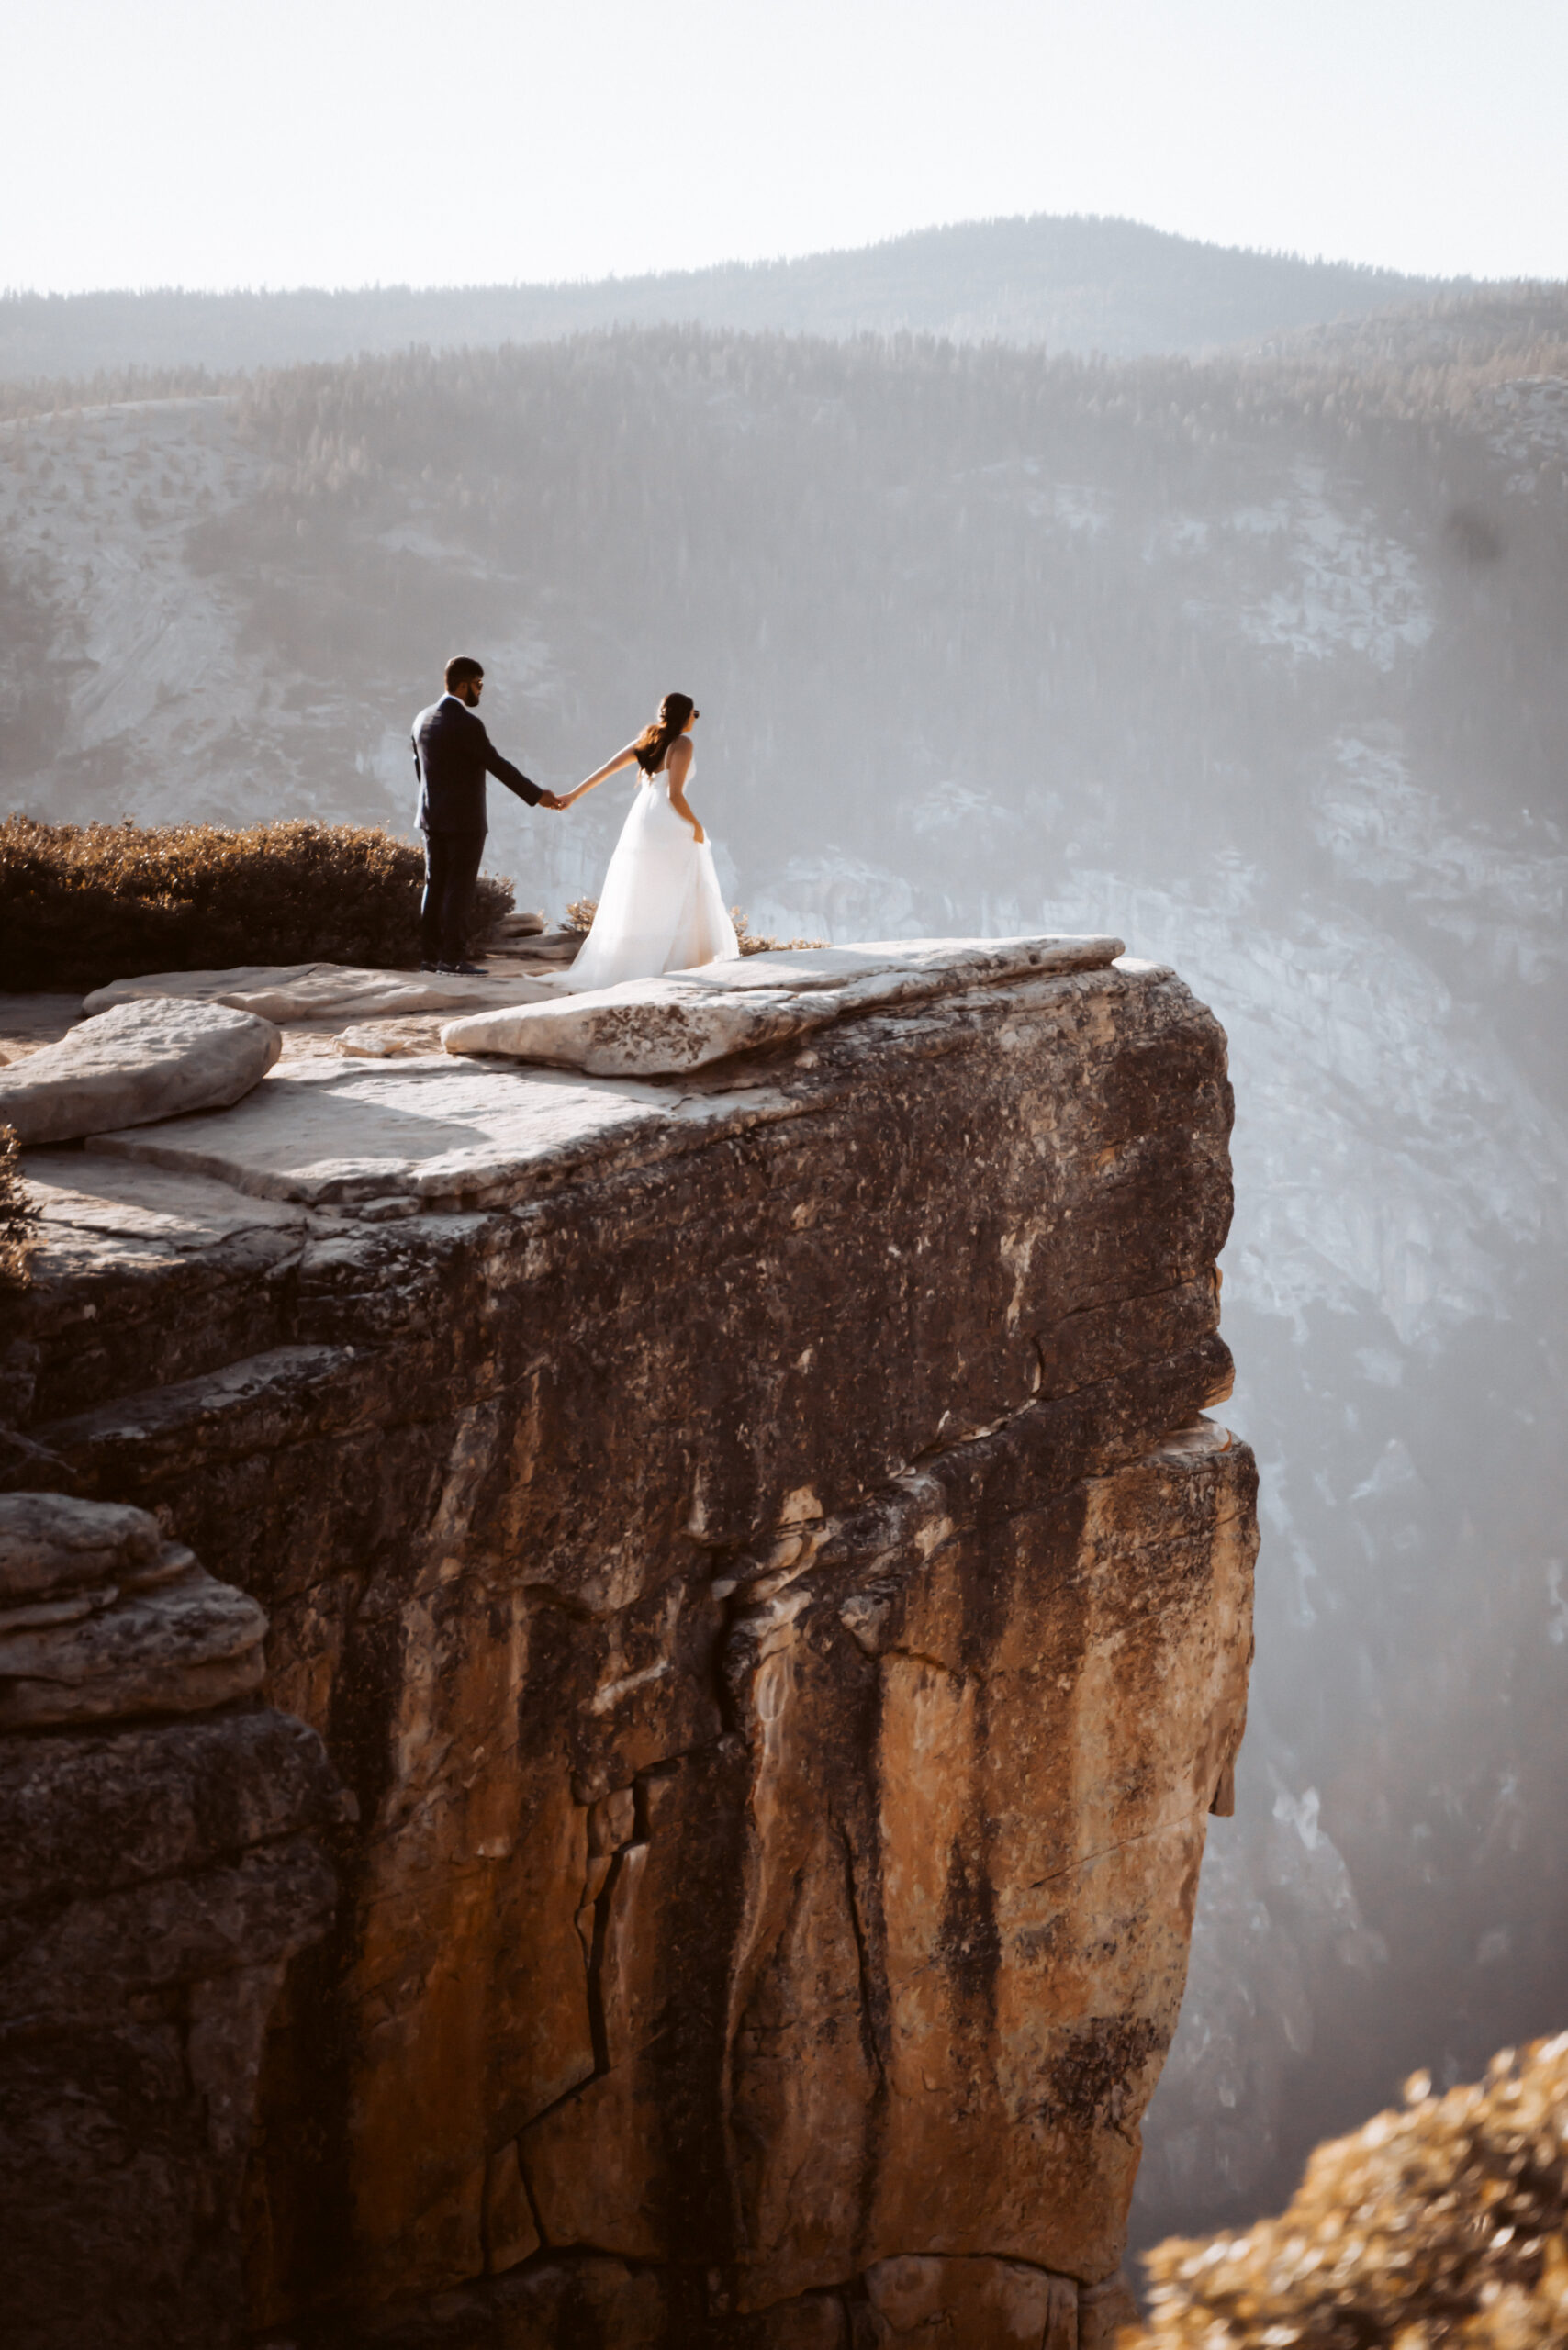 A bride and groom standing on a large rock ledge overlooking Yosemite Valley for their Elopement day 